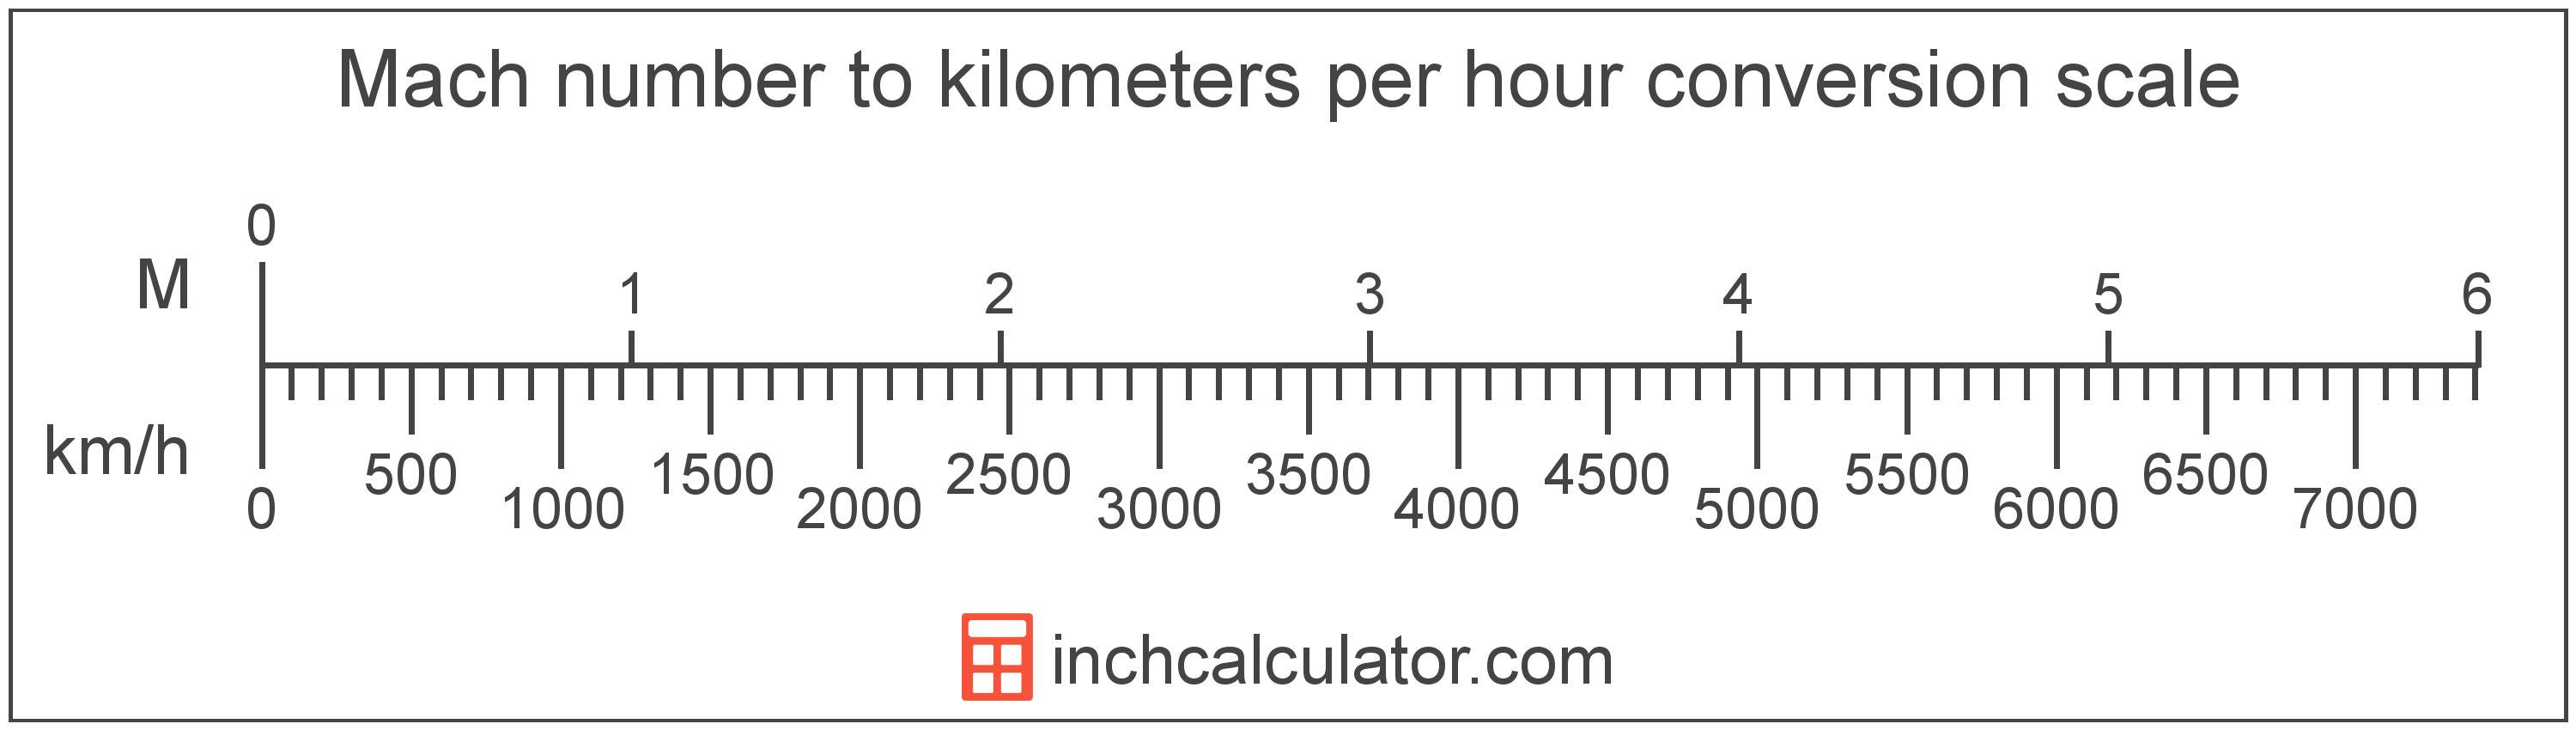 conversion scale showing kilometers per hour and equivalent Mach number speed values